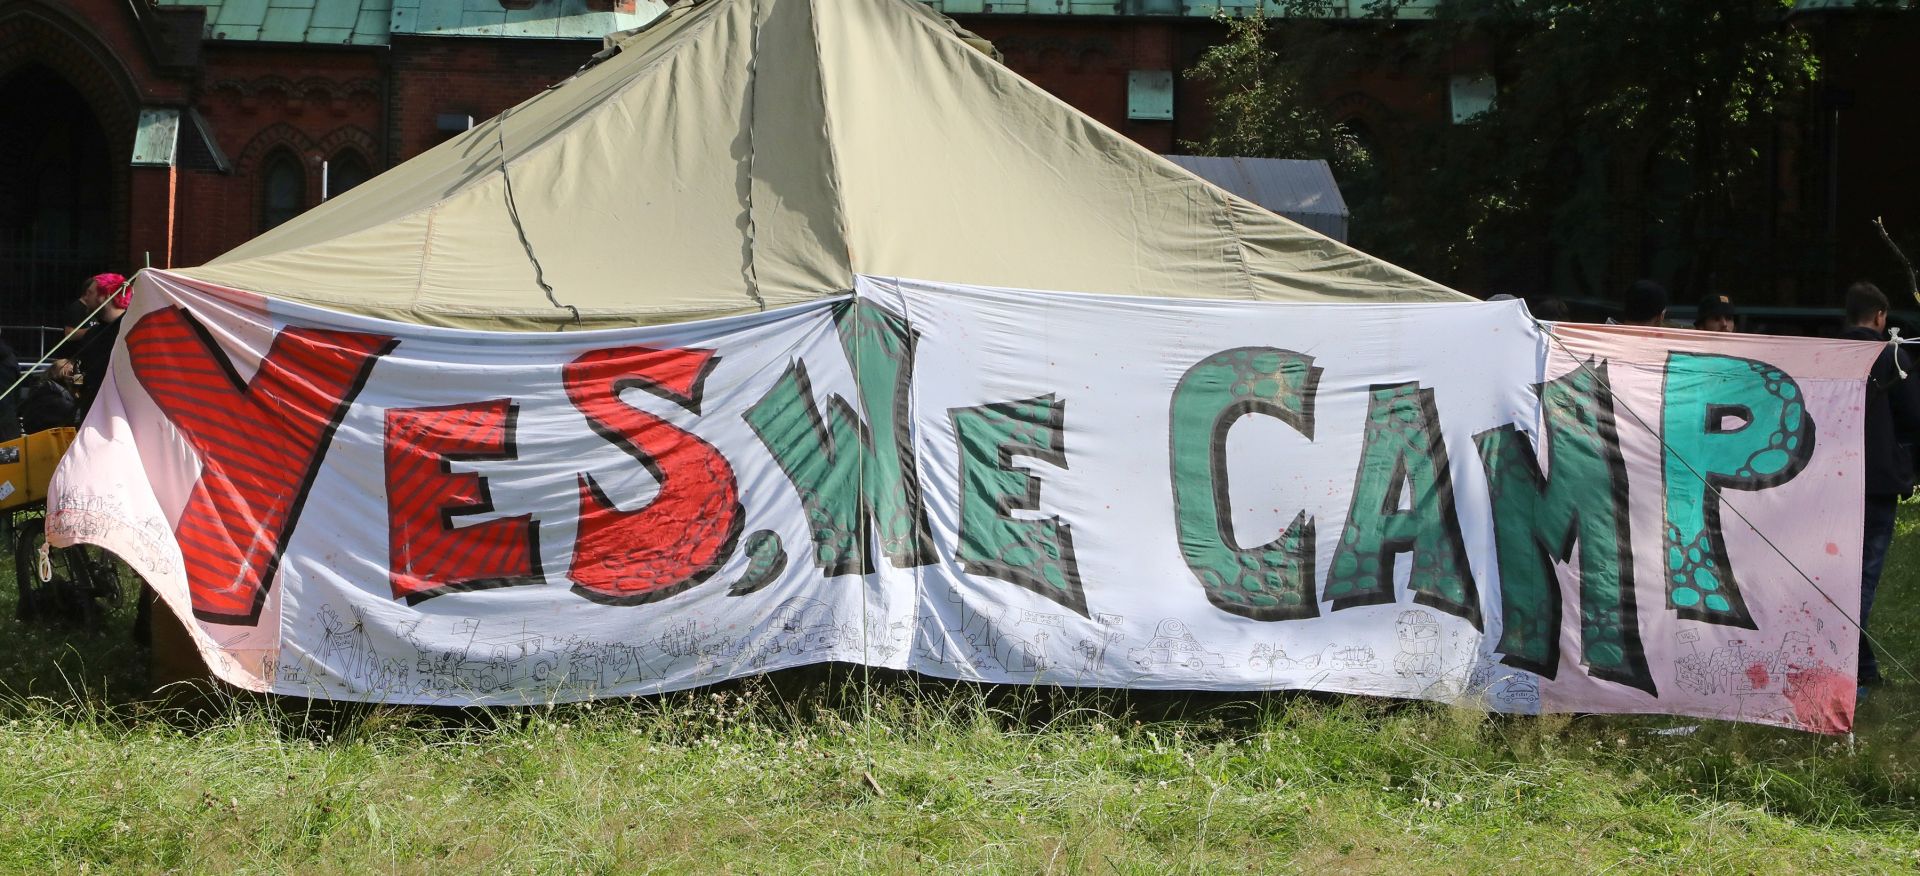 epa06065844 A banner with the inscription 'Yes, we camp' on a tent in a camp of protesters on the site of the Kulturkirche Altona church in Hamburg, northern Germany, 04 July 2017. The G20 Summit (or G-20 or Group of Twenty) is an international forum for governments from 20 major economies. The summit is taking place in Hamburg 07 to 08 July 2017.  EPA/STR